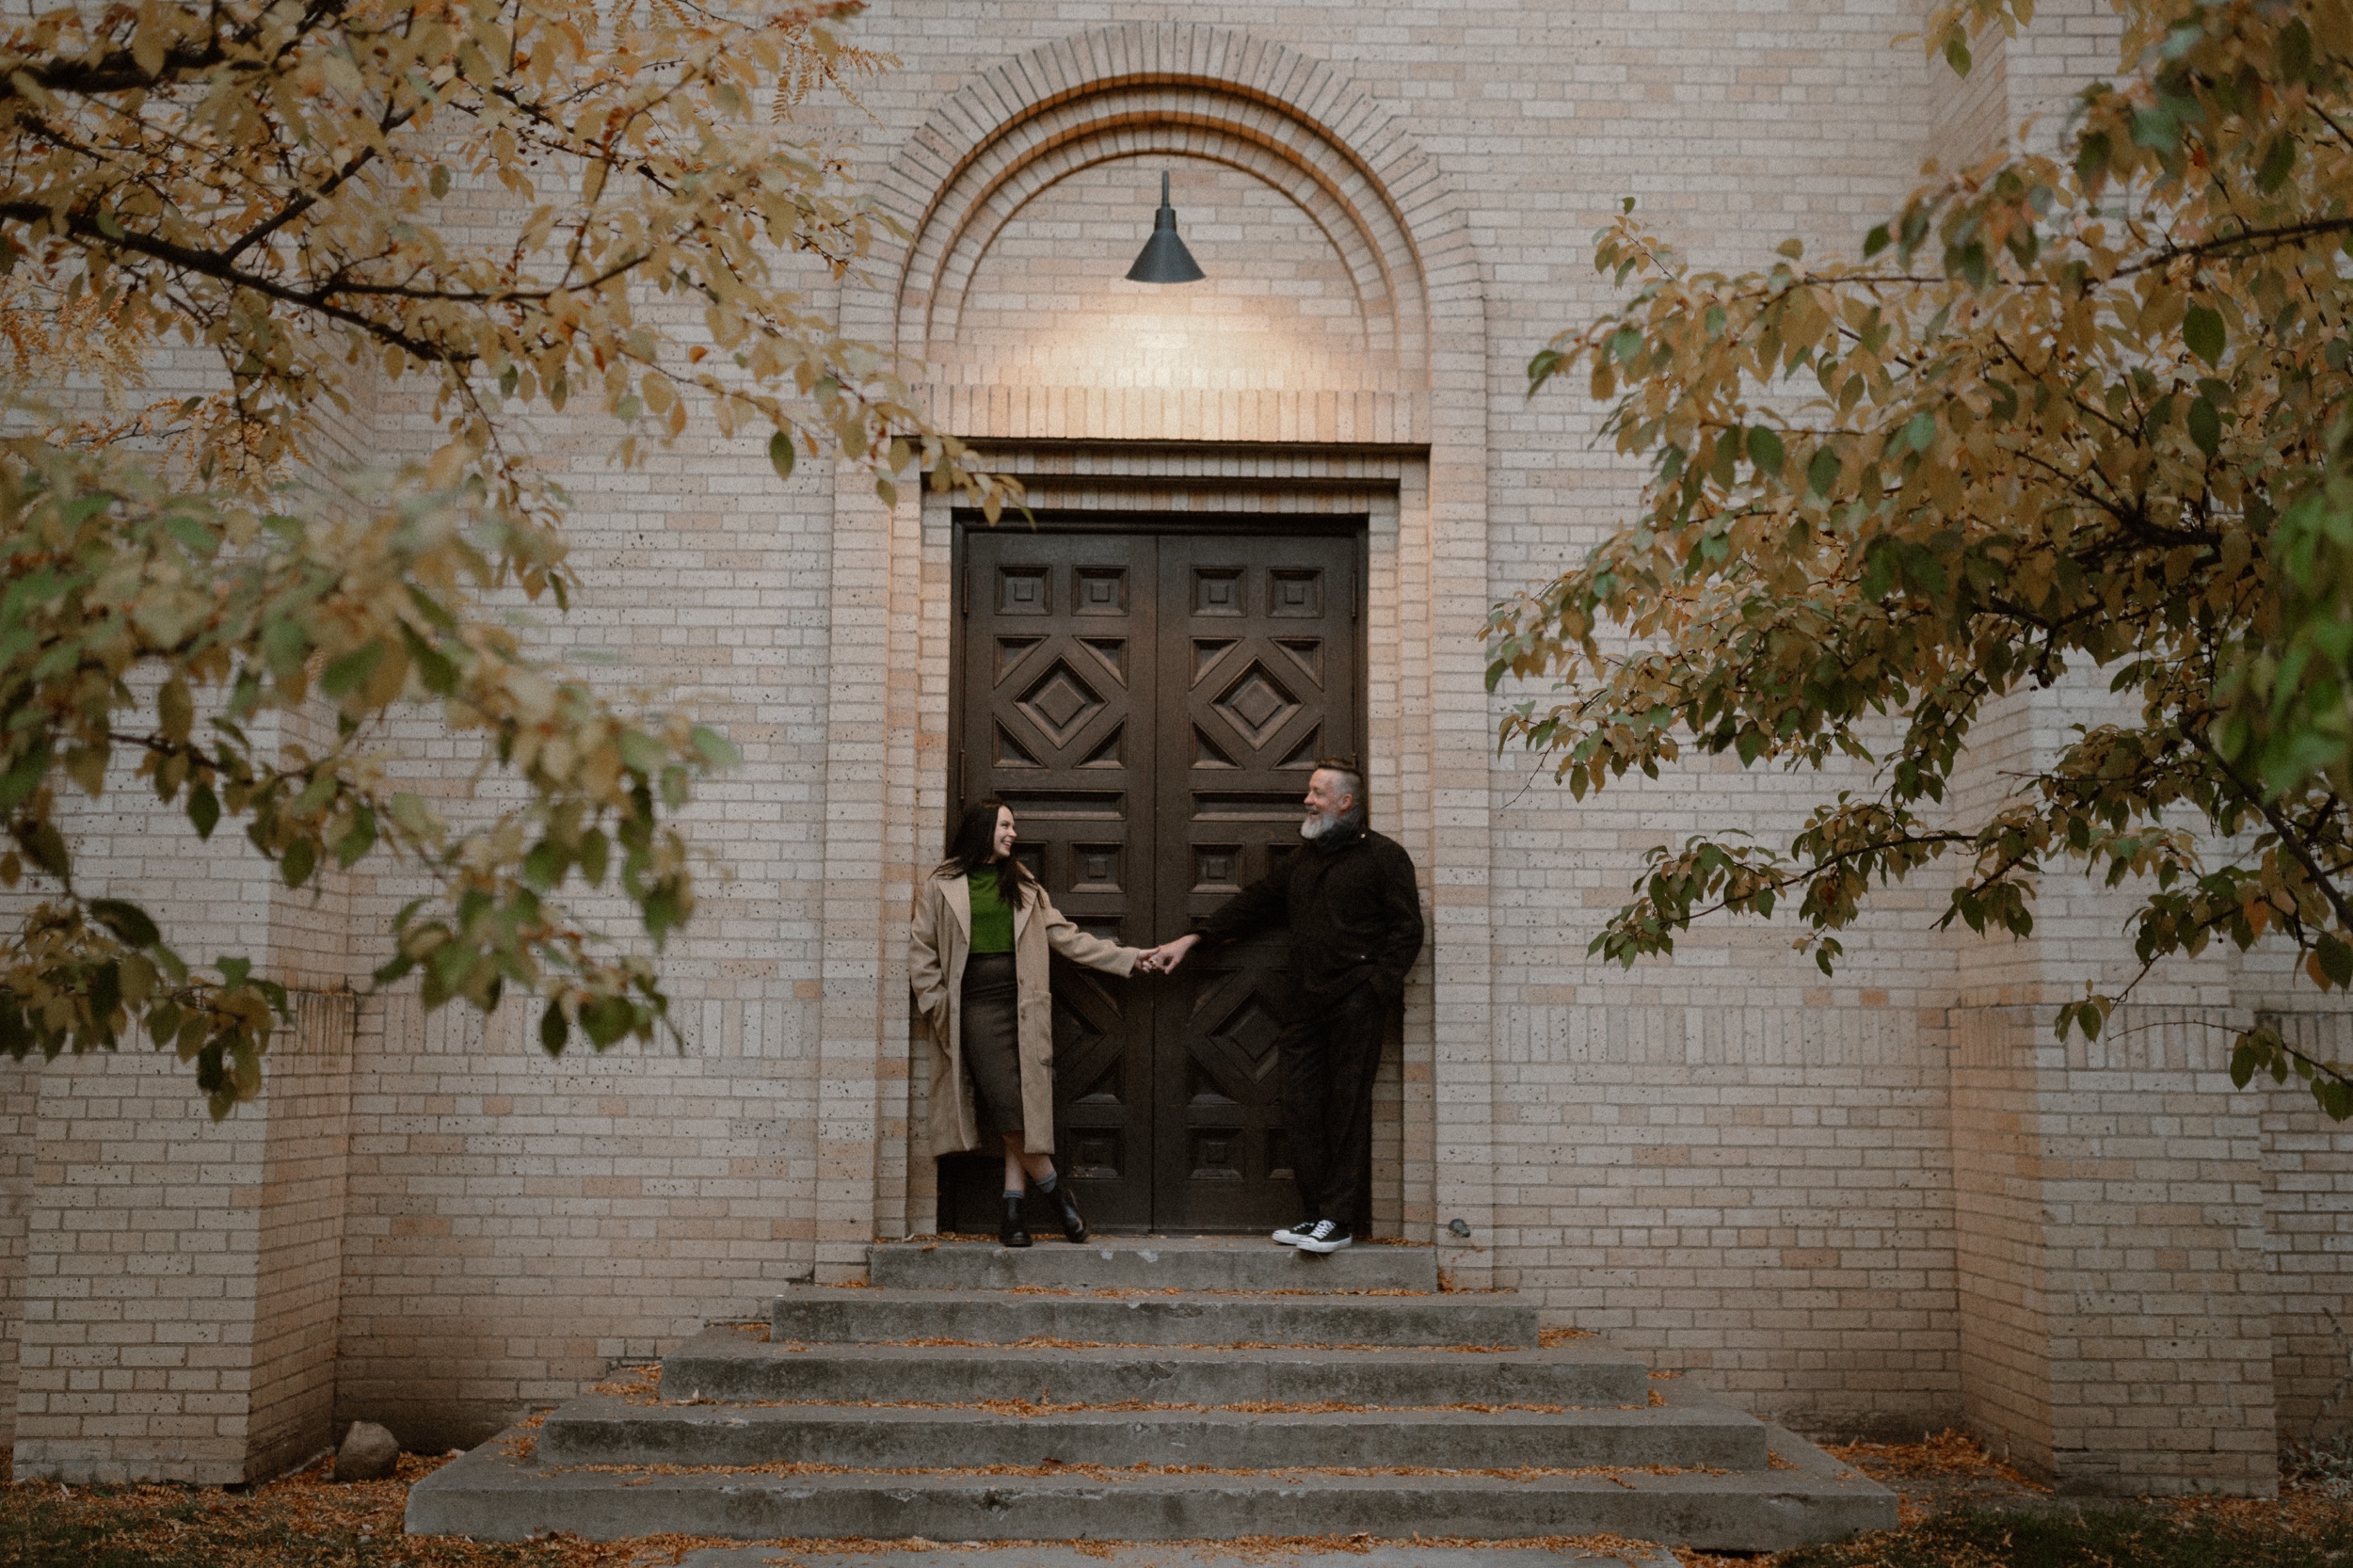 A color photo of an engaged couple holding hands in front of The Smiley Building in Durango, Colorado during the fall for their engagement session, taken by Colorado wedding photographer, Ashley Joyce.